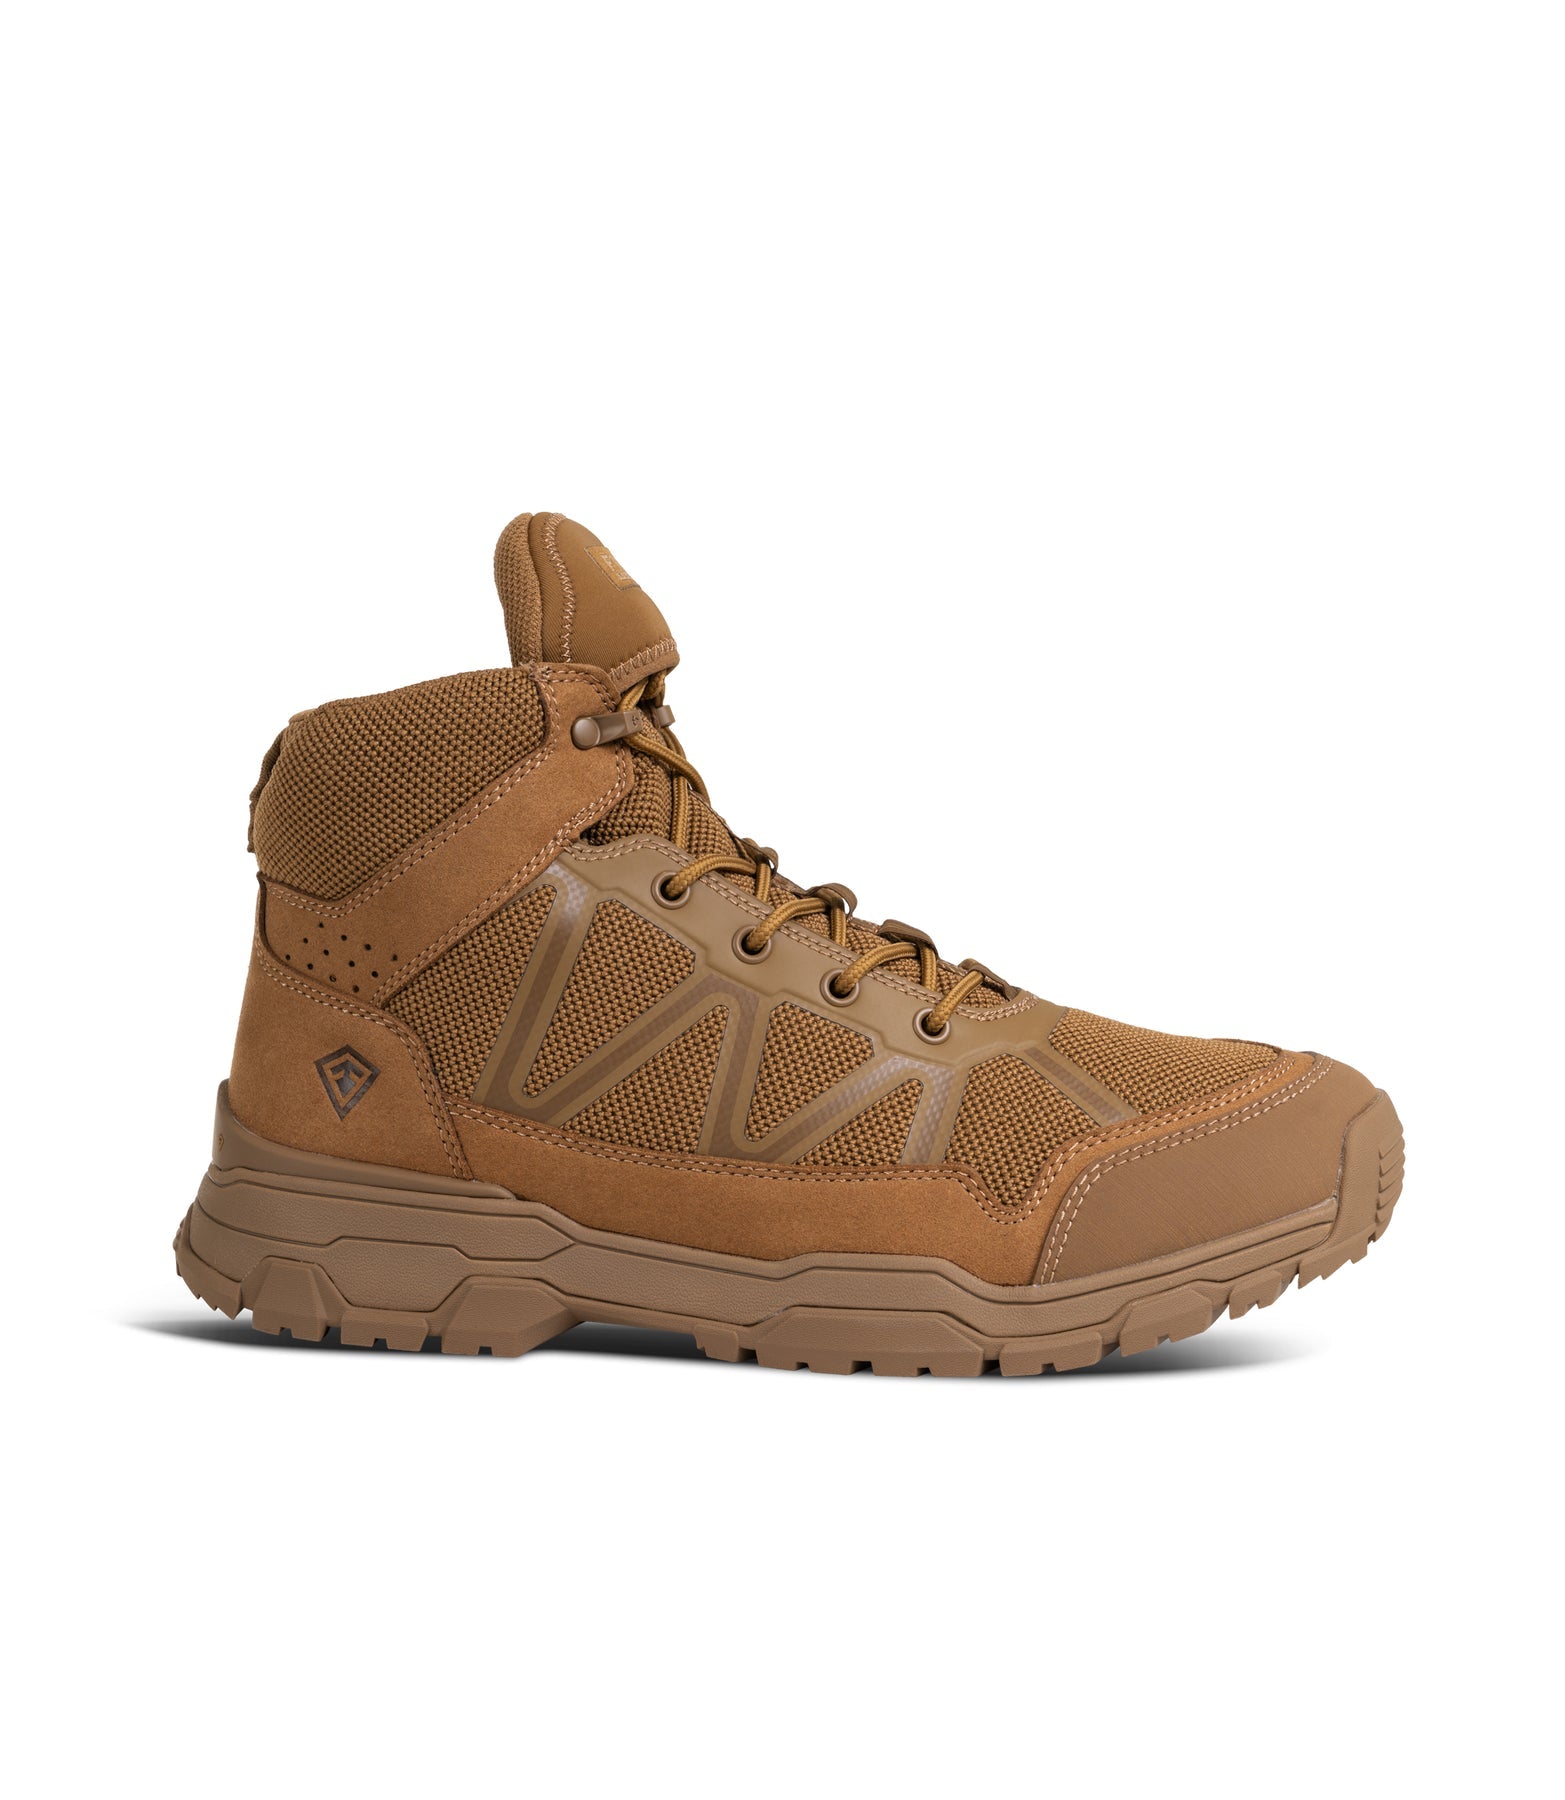 *ARRIVING SOON* First Tactical Men's 5" Operator Mid (165061) (Available in Black & Coyote)